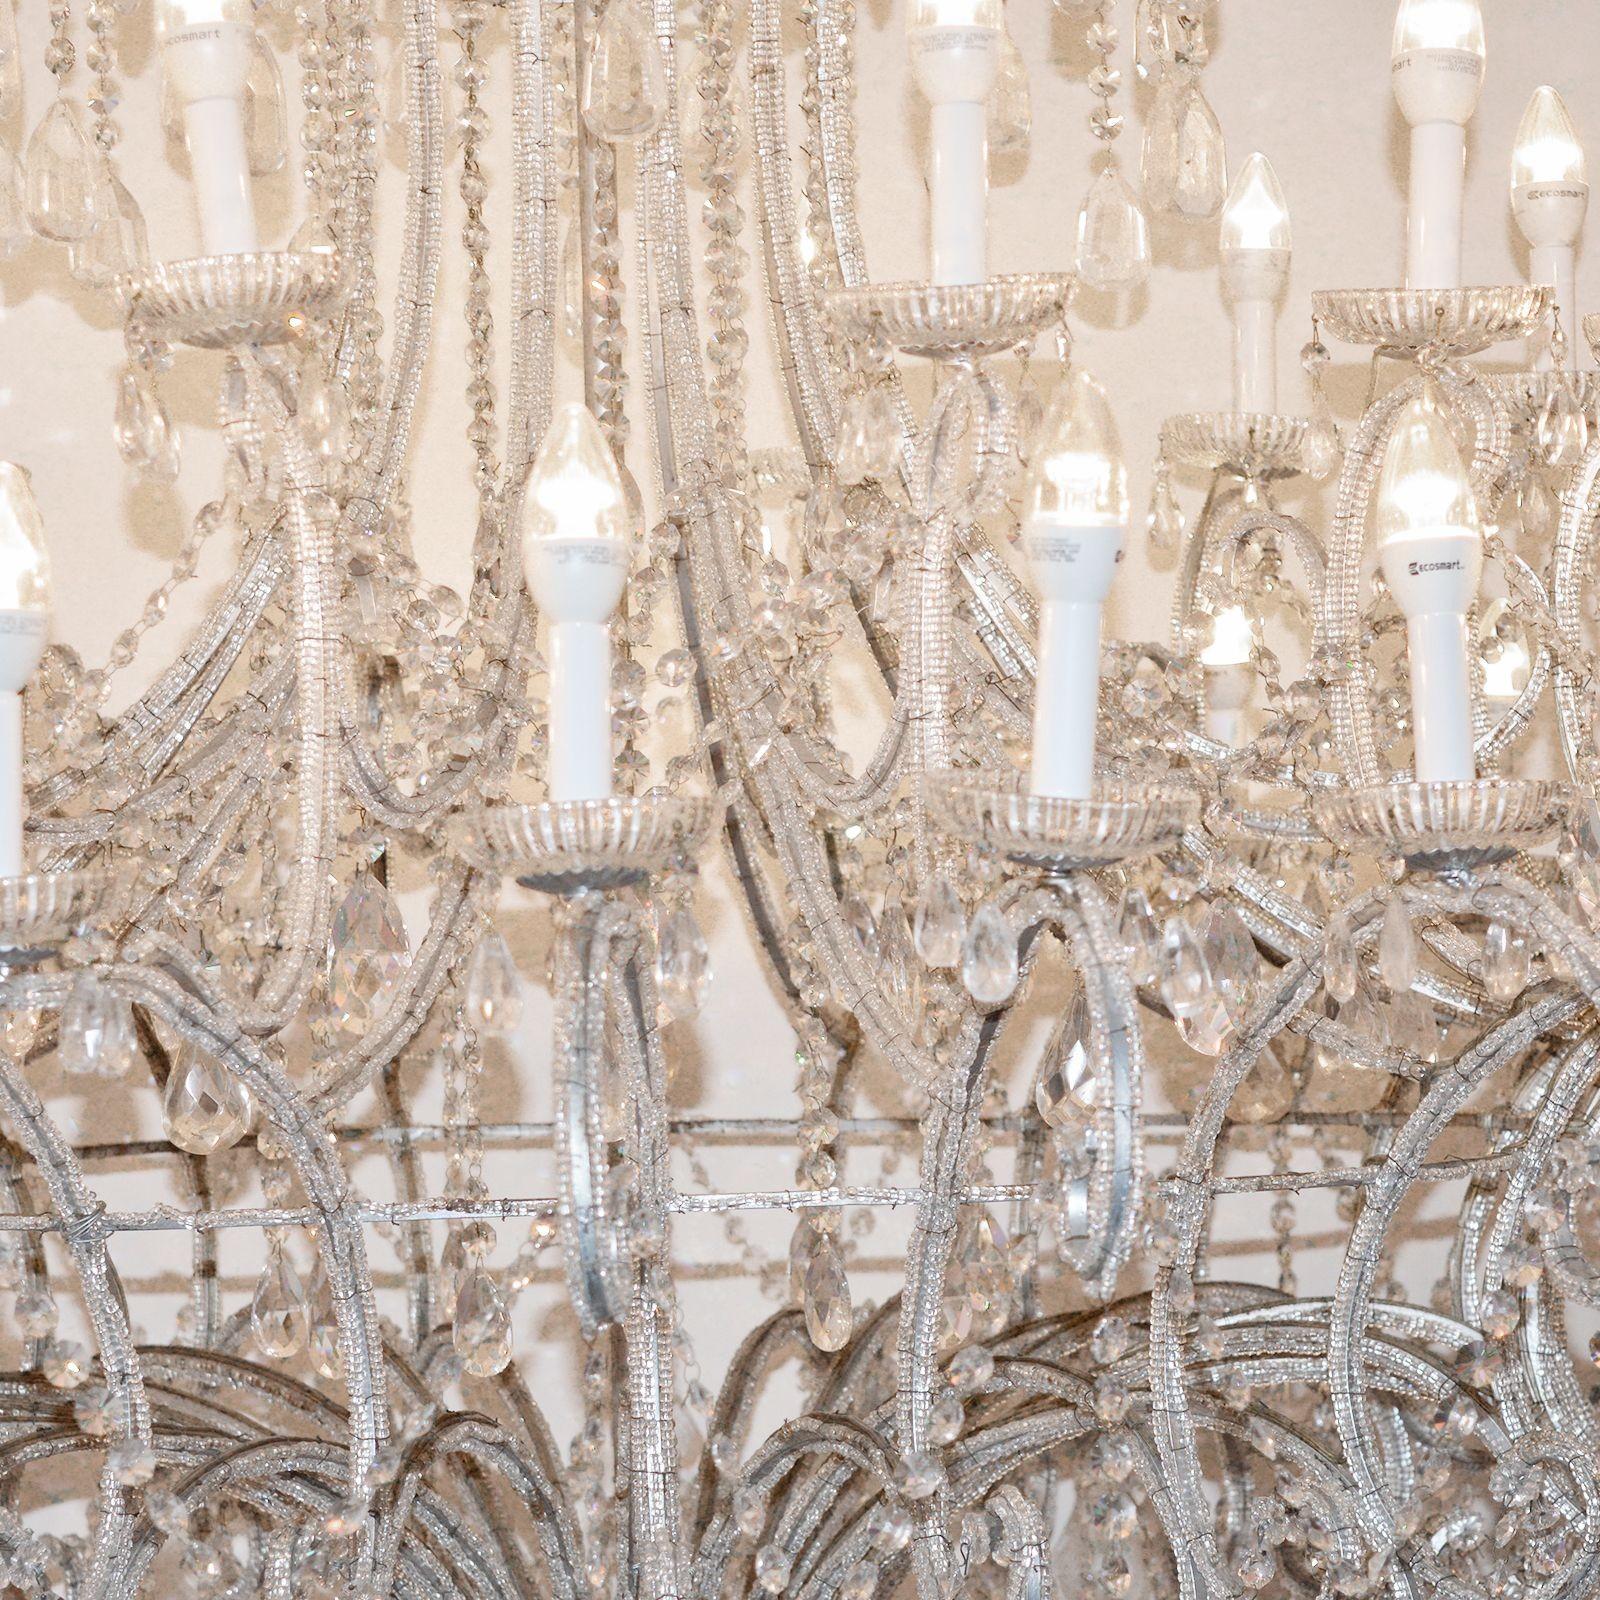 Mid-20th Century Glamorous Oversized Venetian Beading and Rock Crystal Chandelier. Italy, c. 1950 For Sale